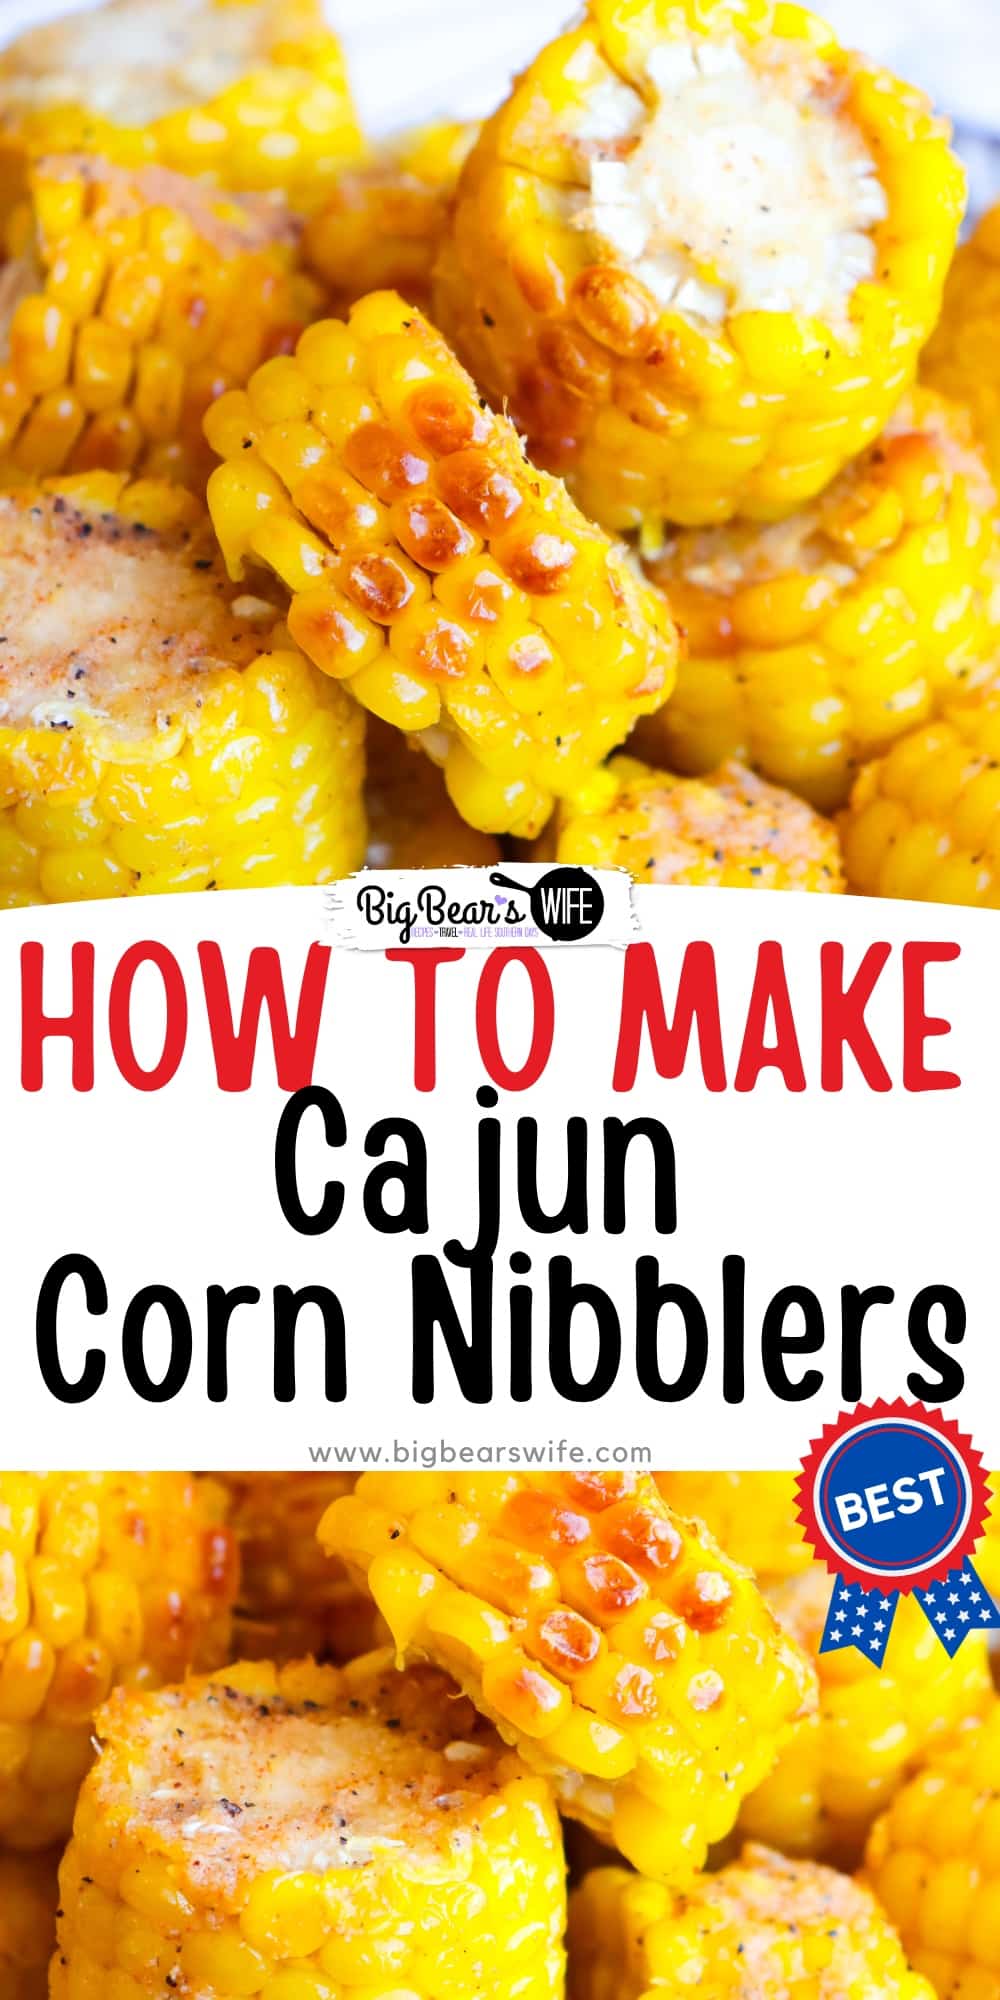 Elevate your snack game with these Air Fryer Cajun corn nibblers that deliver a bold and flavorful punch. Packed with a fiery blend of spices and a satisfying bite, these nibblers are perfect for satisfying your cravings and impressing your taste buds. via @bigbearswife